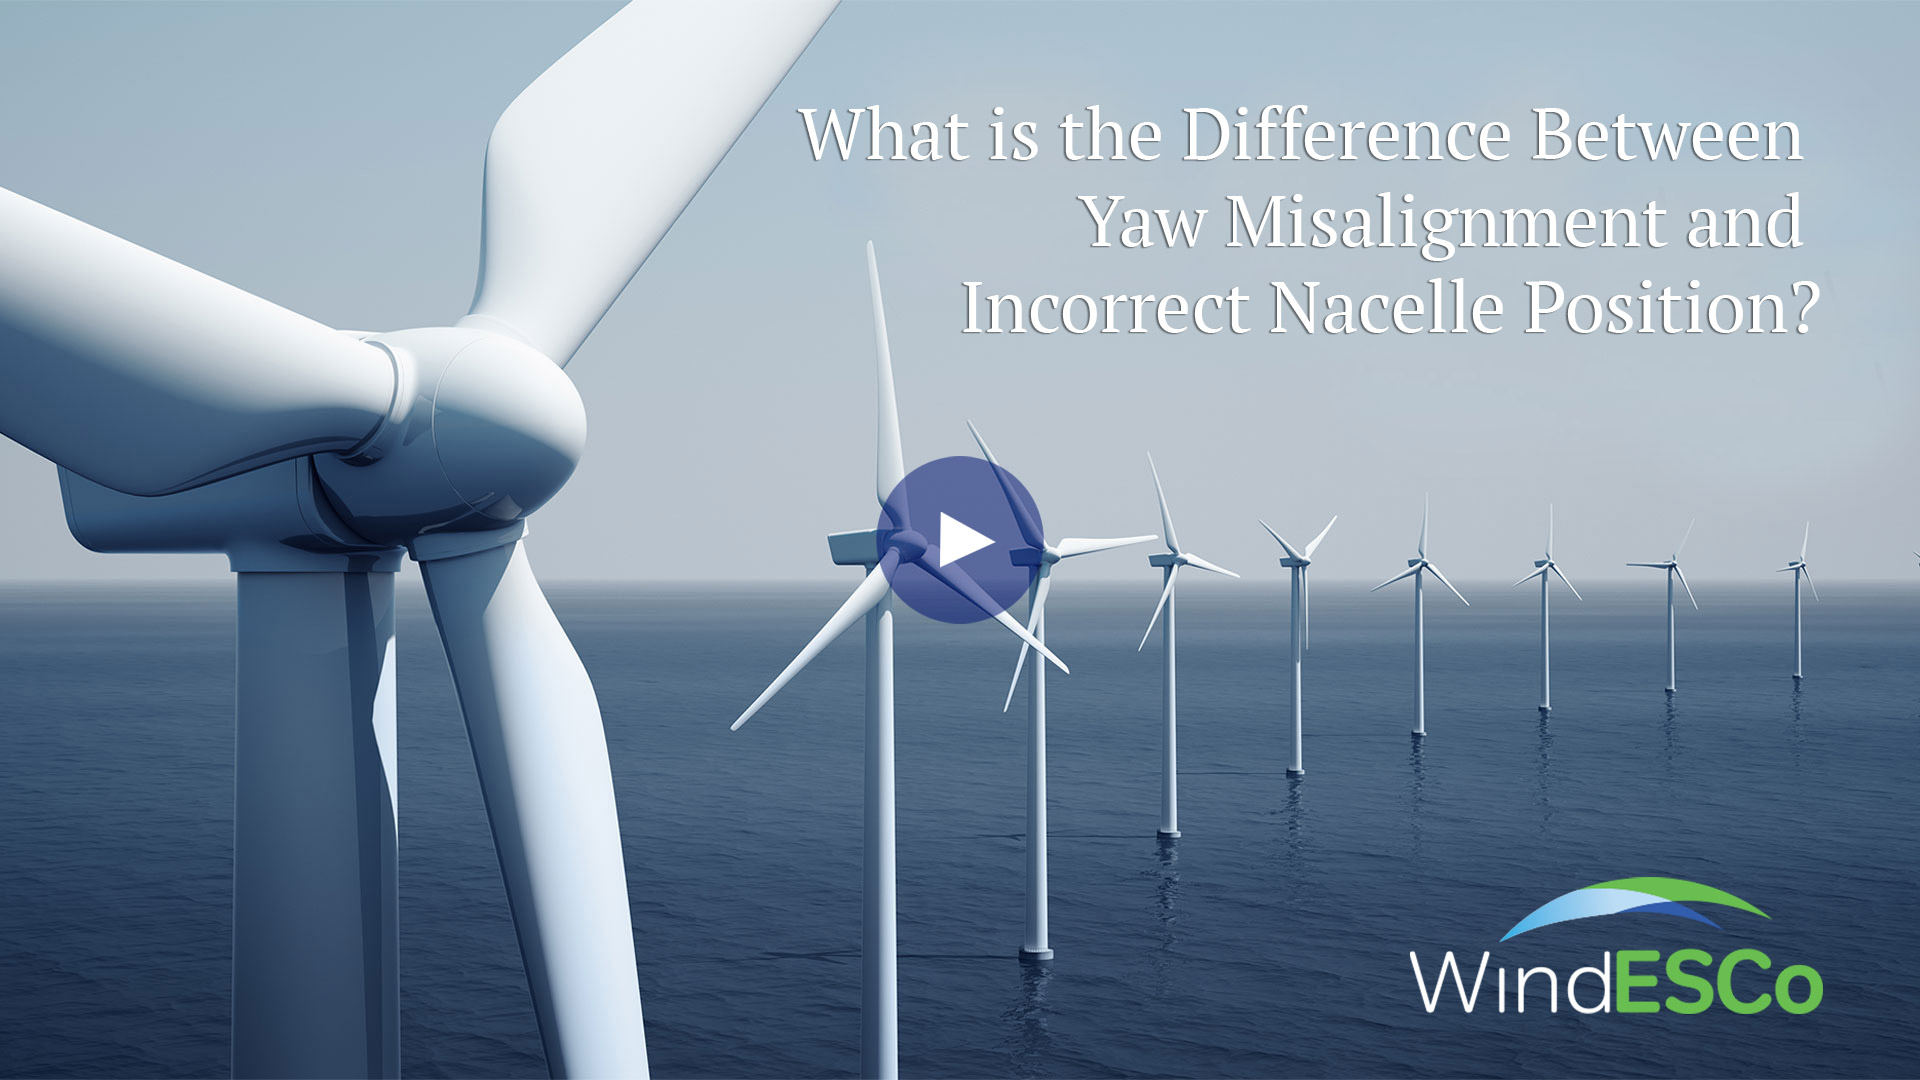 What is the Difference Between Yaw Misalignment and Incorrect Nacelle Position?